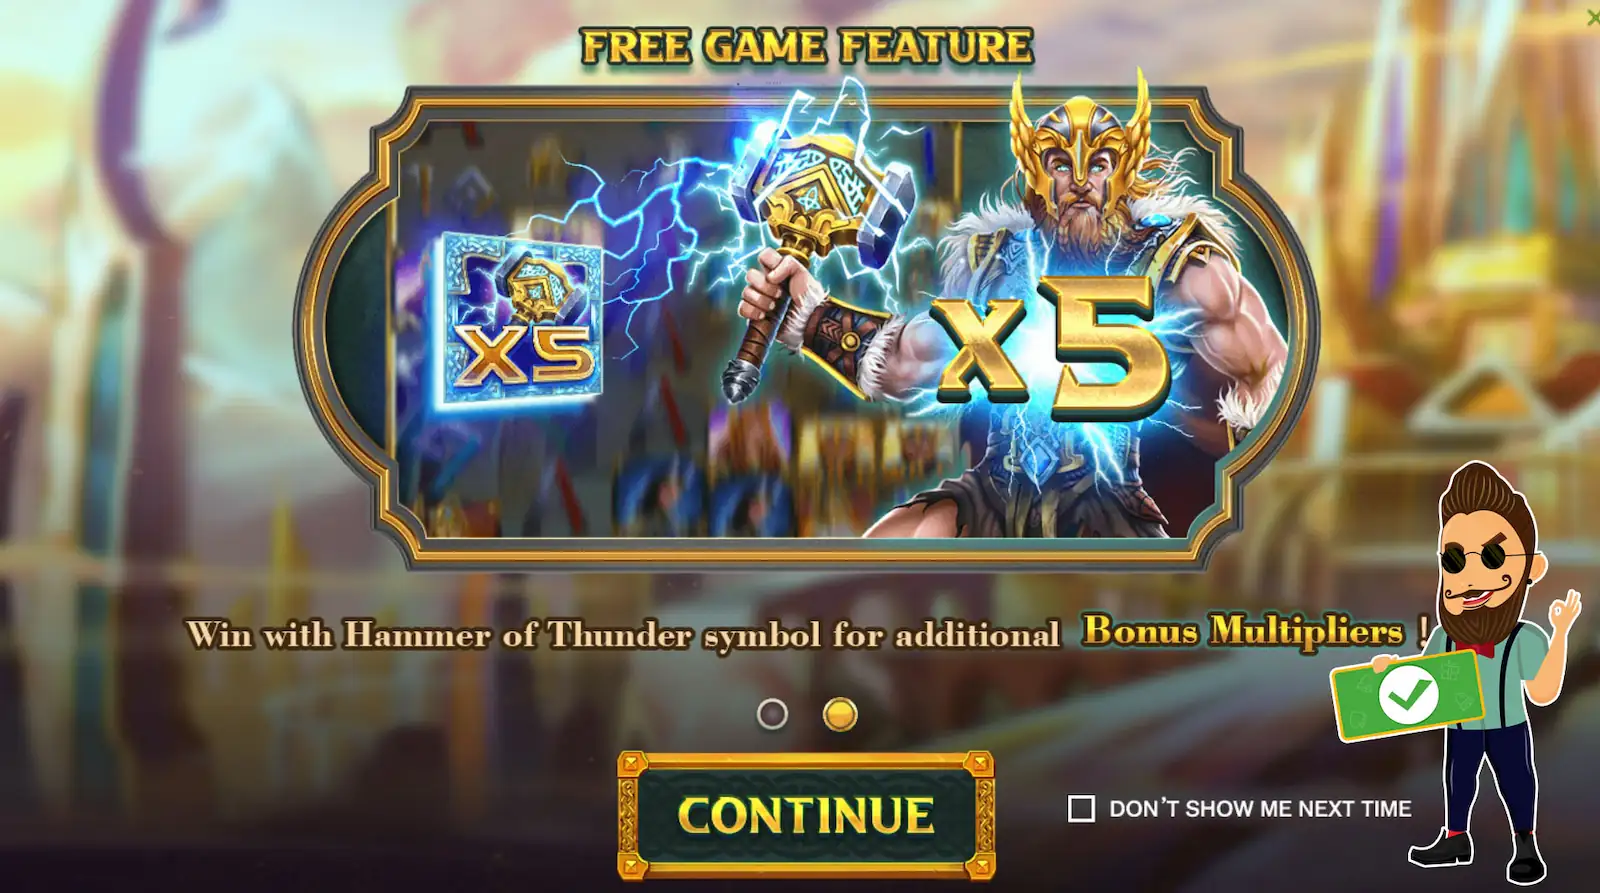 Hammer of Thunder Free Games Feature